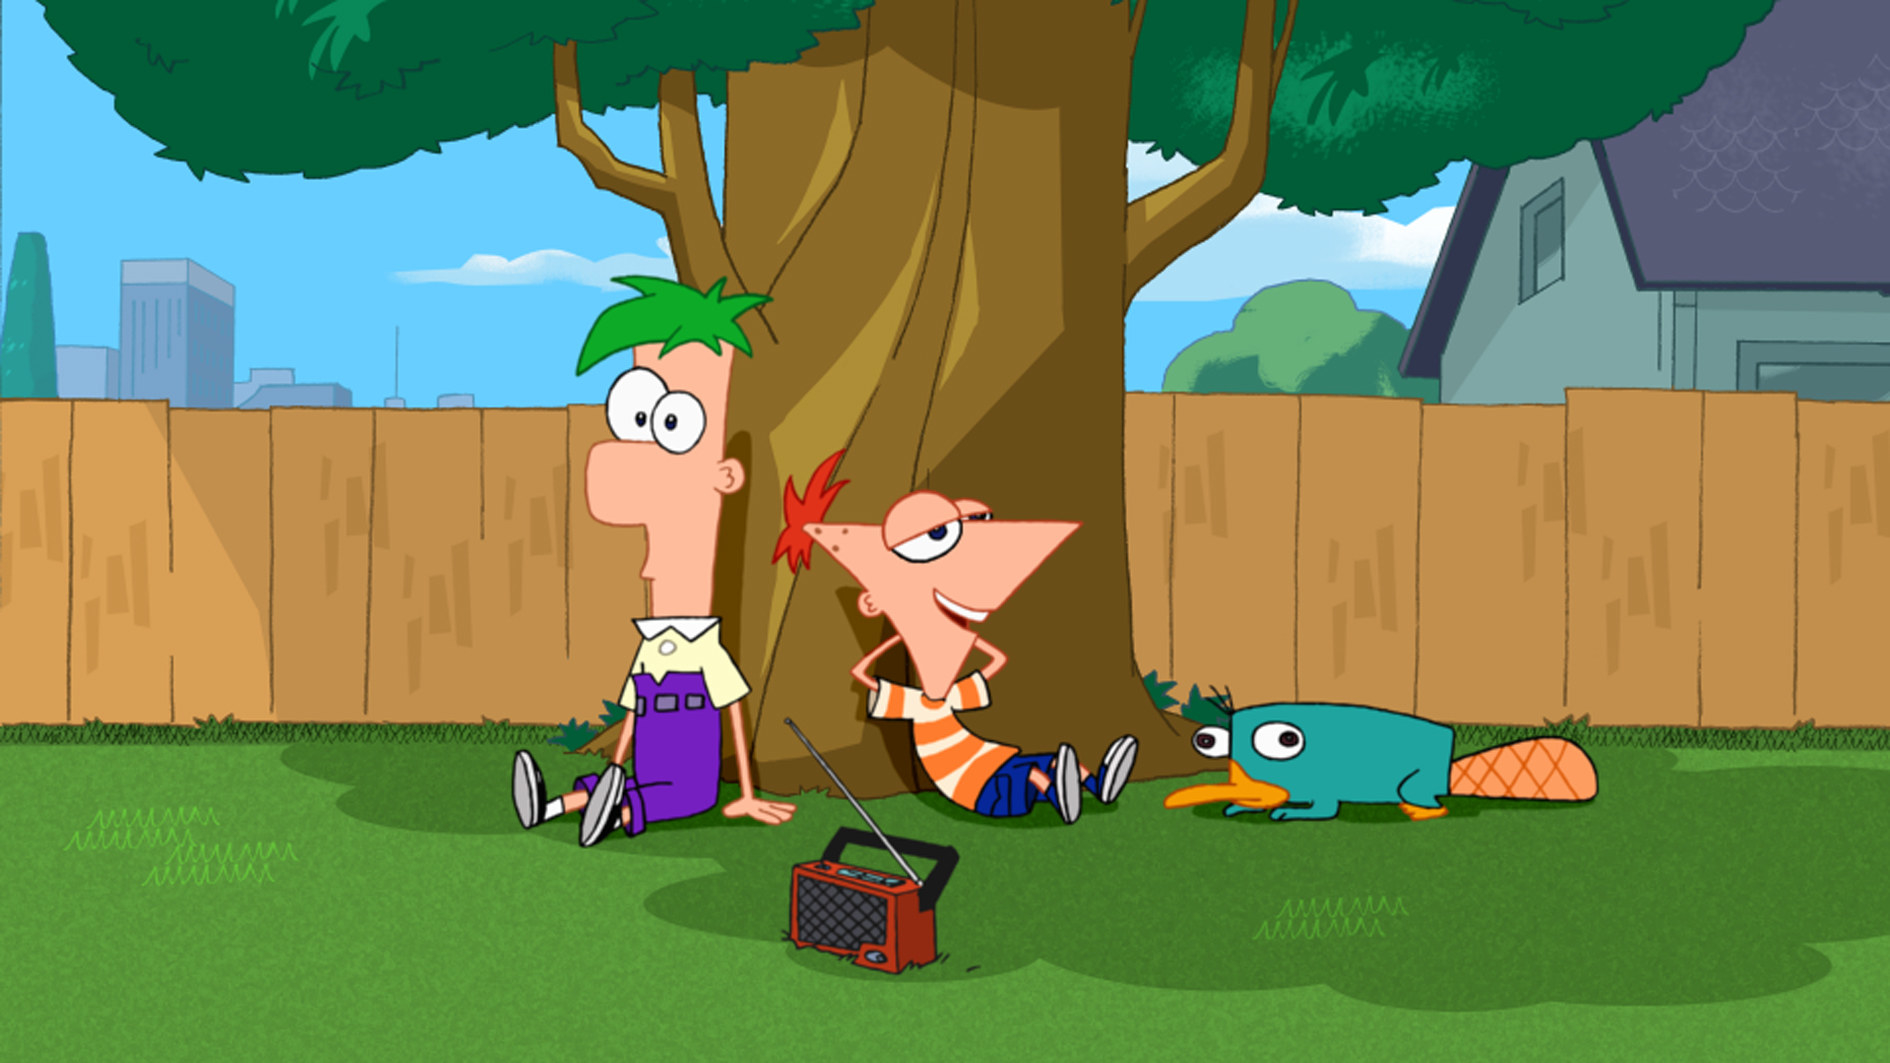 but also introduces new fans to the world of Phineas and Ferb. 